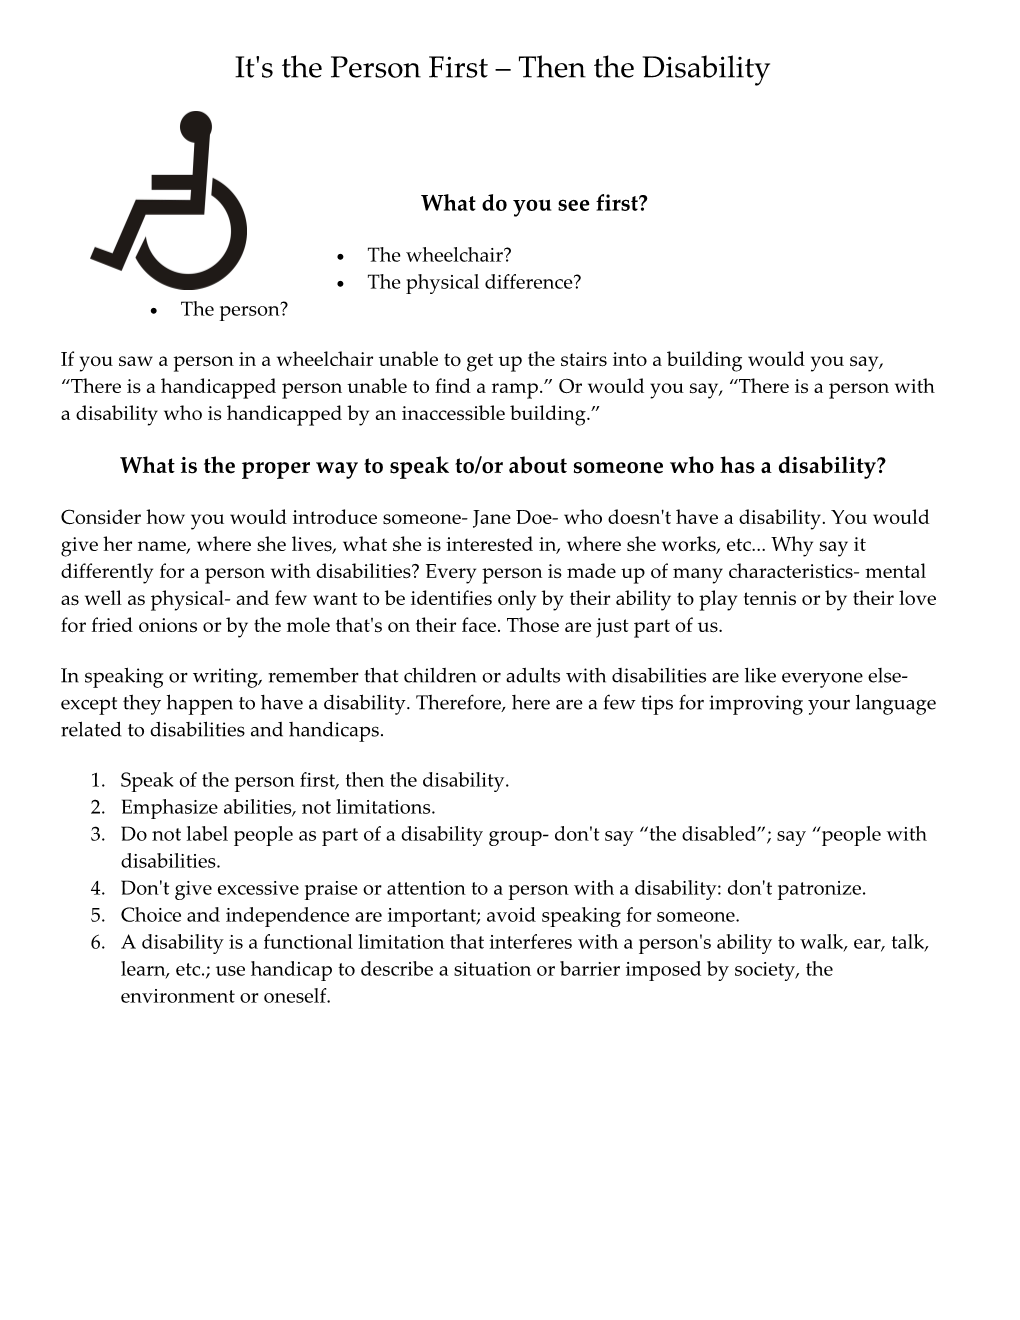 What Should You See First, the Person Or the Disability? ______